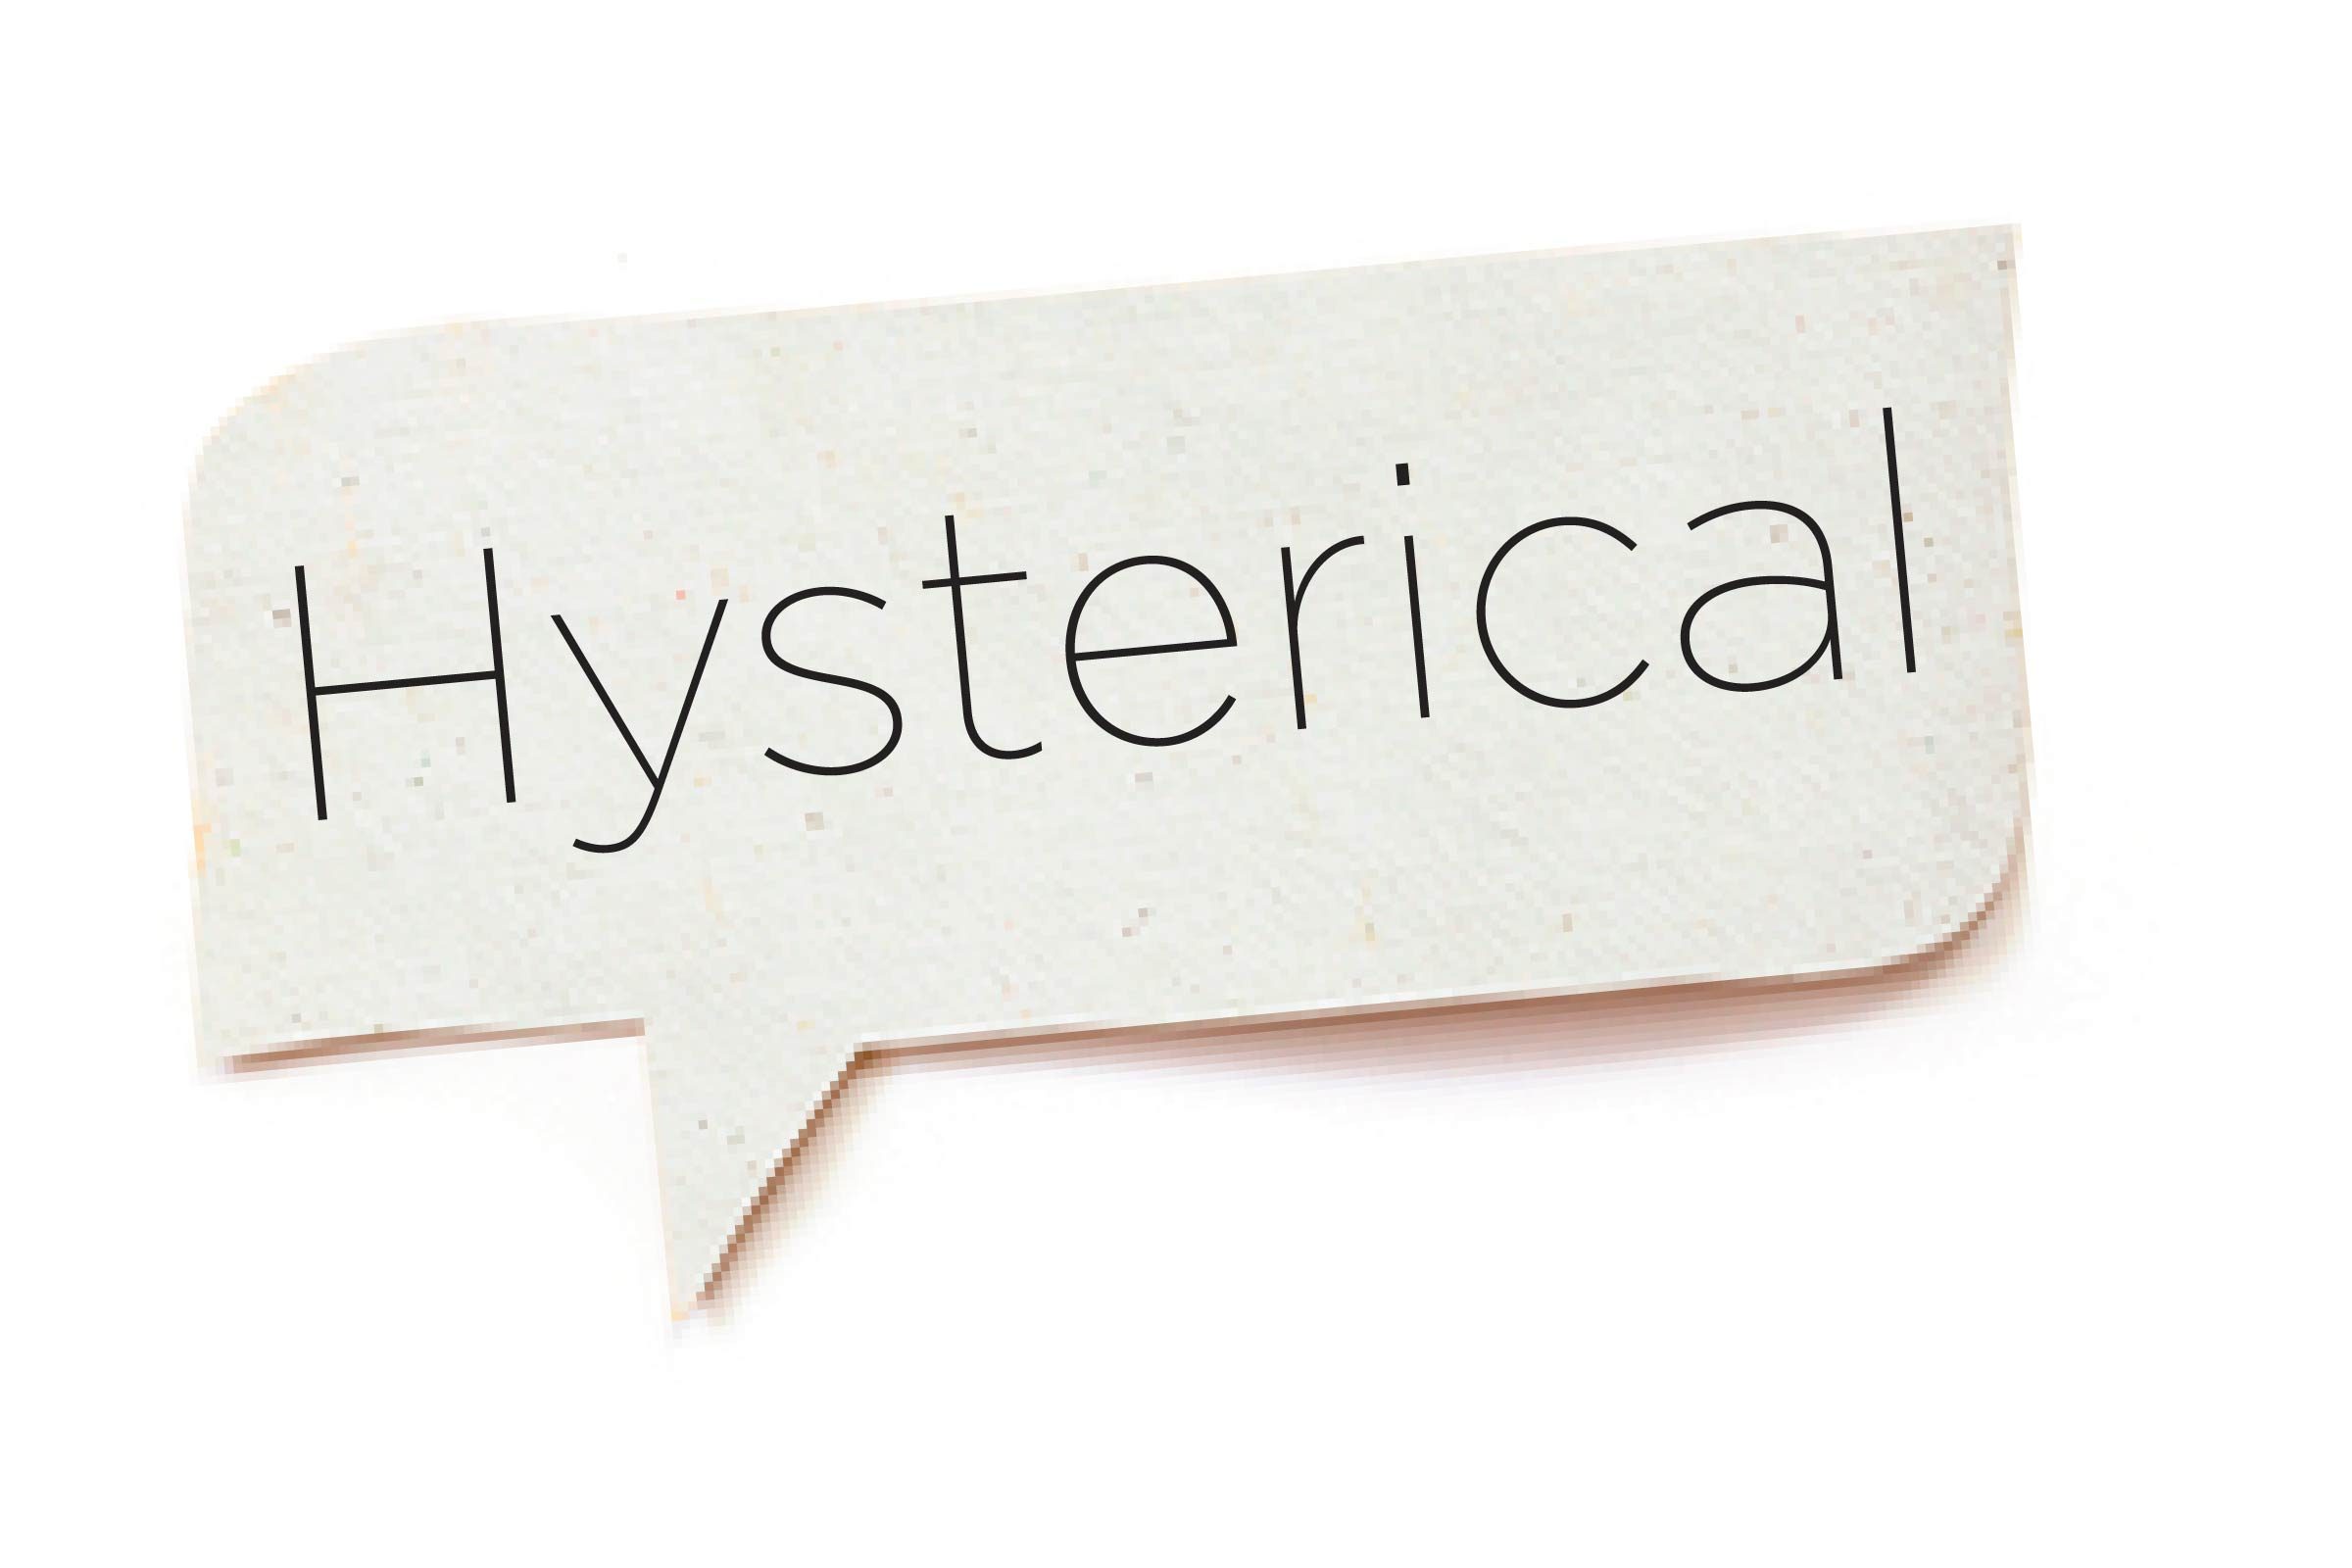 <p>The word hysterical derives from the Greek word for uterus. It usually gets tossed around as a description for emotional women and feeds into the sexist stereotype that women are "naturally" crazy. (Male) doctors had a bunch of weird ideas about the biology of women that they used to rationalize sexist beliefs. These ideas still have influence today, but when it comes to gender, the unscientific advice from centuries ago doesn't apply. Find out some <a href="https://www.rd.com/list/things-to-never-say-at-work/">things you should never, ever say at work</a>.</p>